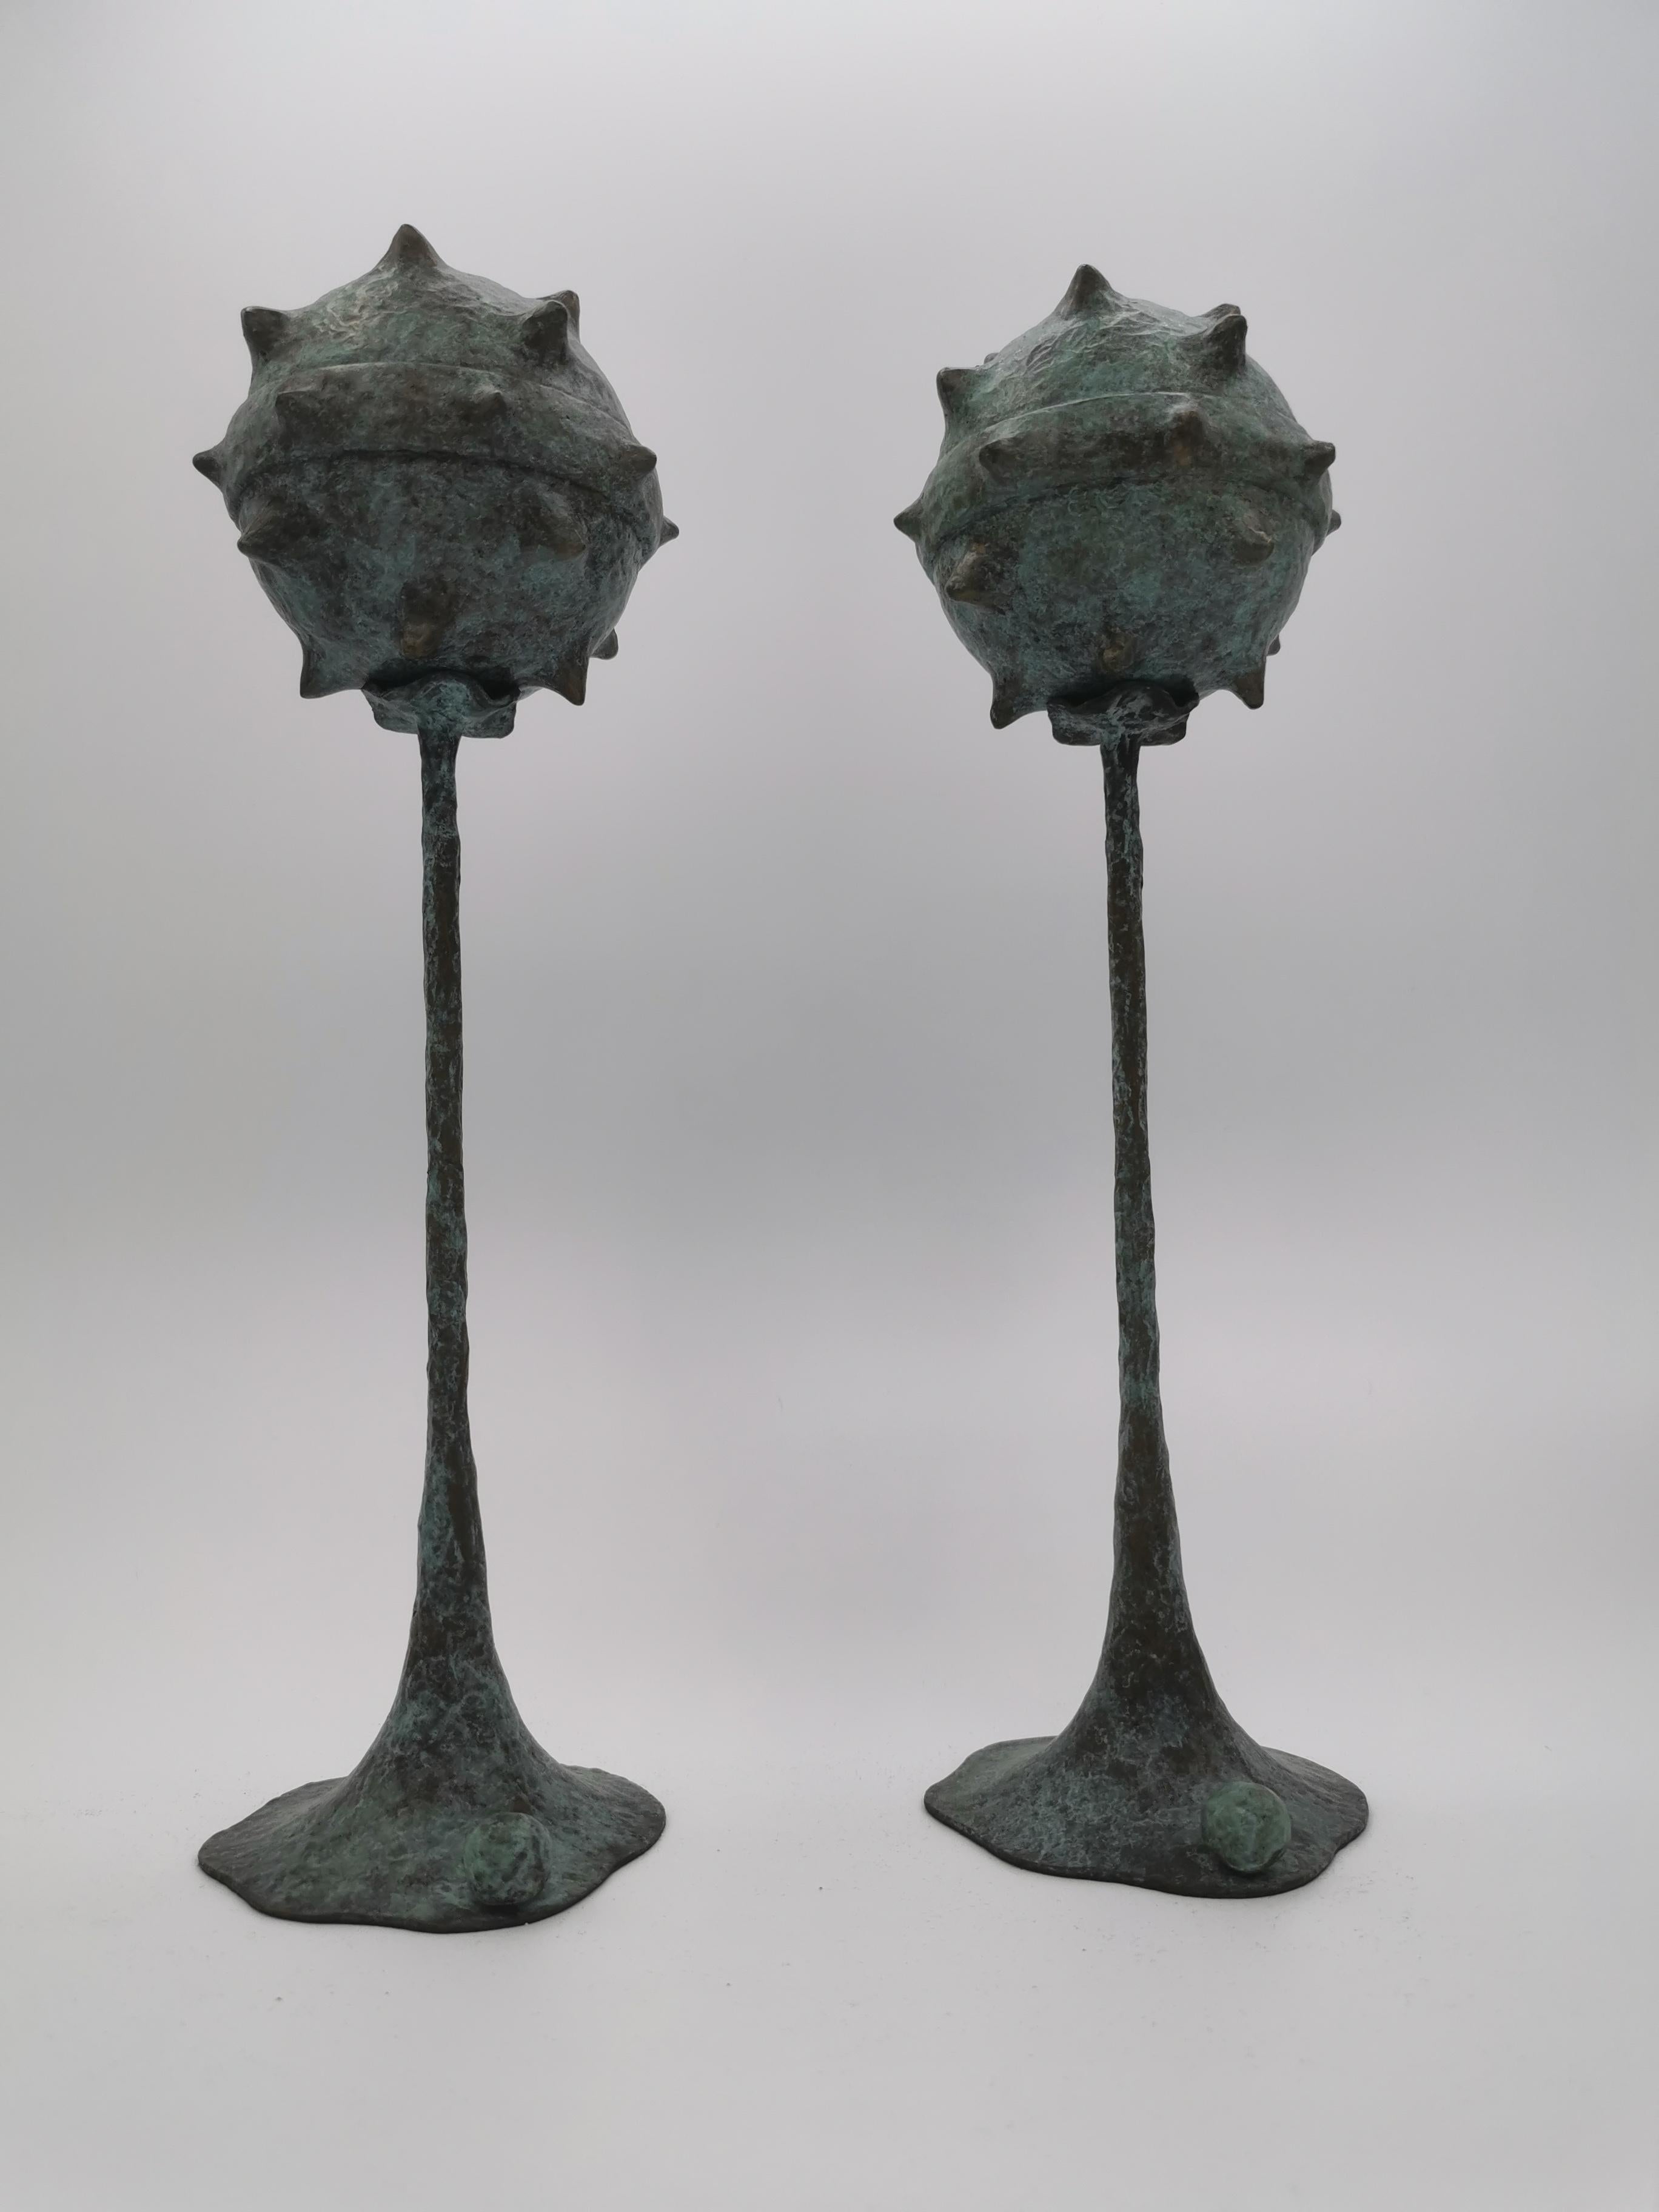 Set of 2 Primus small candlesticks by Emanuele Colombi 
Limited Edition: 1 out of 12
Dimensions: W 10 x D 10 x H 31.5 cm
Materials: Bronze

Emanuele Colombi is an architect, interiors designer and sculptor who has worked in the past on various